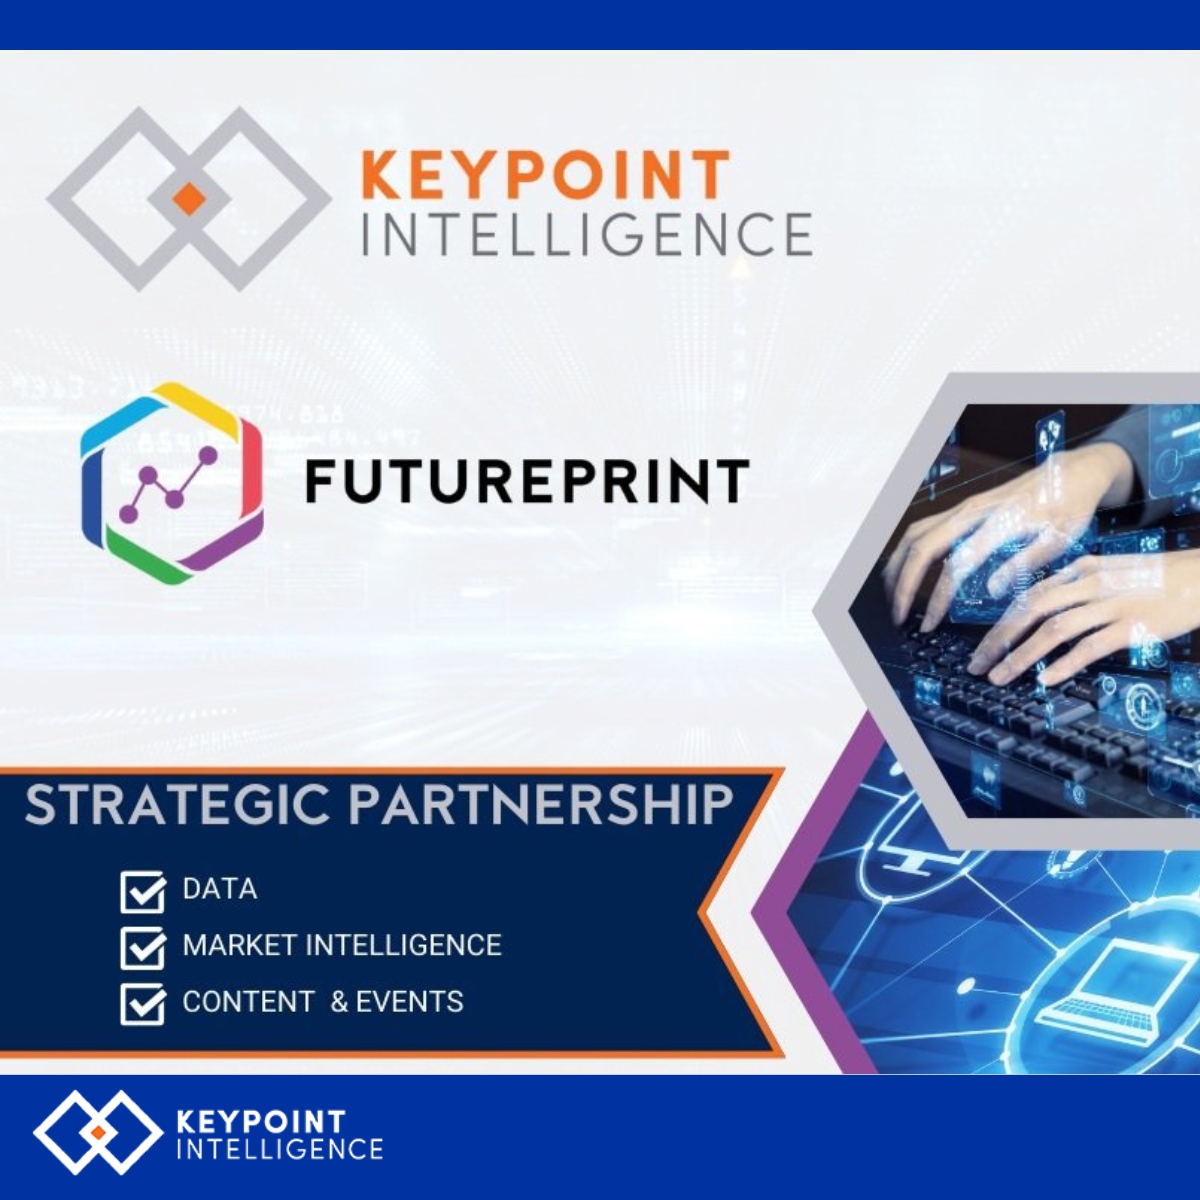 Keypoint Intelligence and FuturePrint have joined forces to drive innovation and thought leadership in the #print industry.
🔗 Learn more about our partnership and how we’re shaping the future of print: hubs.li/Q02xqrP00
#PrintIndustry #KeypointIntelligence #FuturePrint